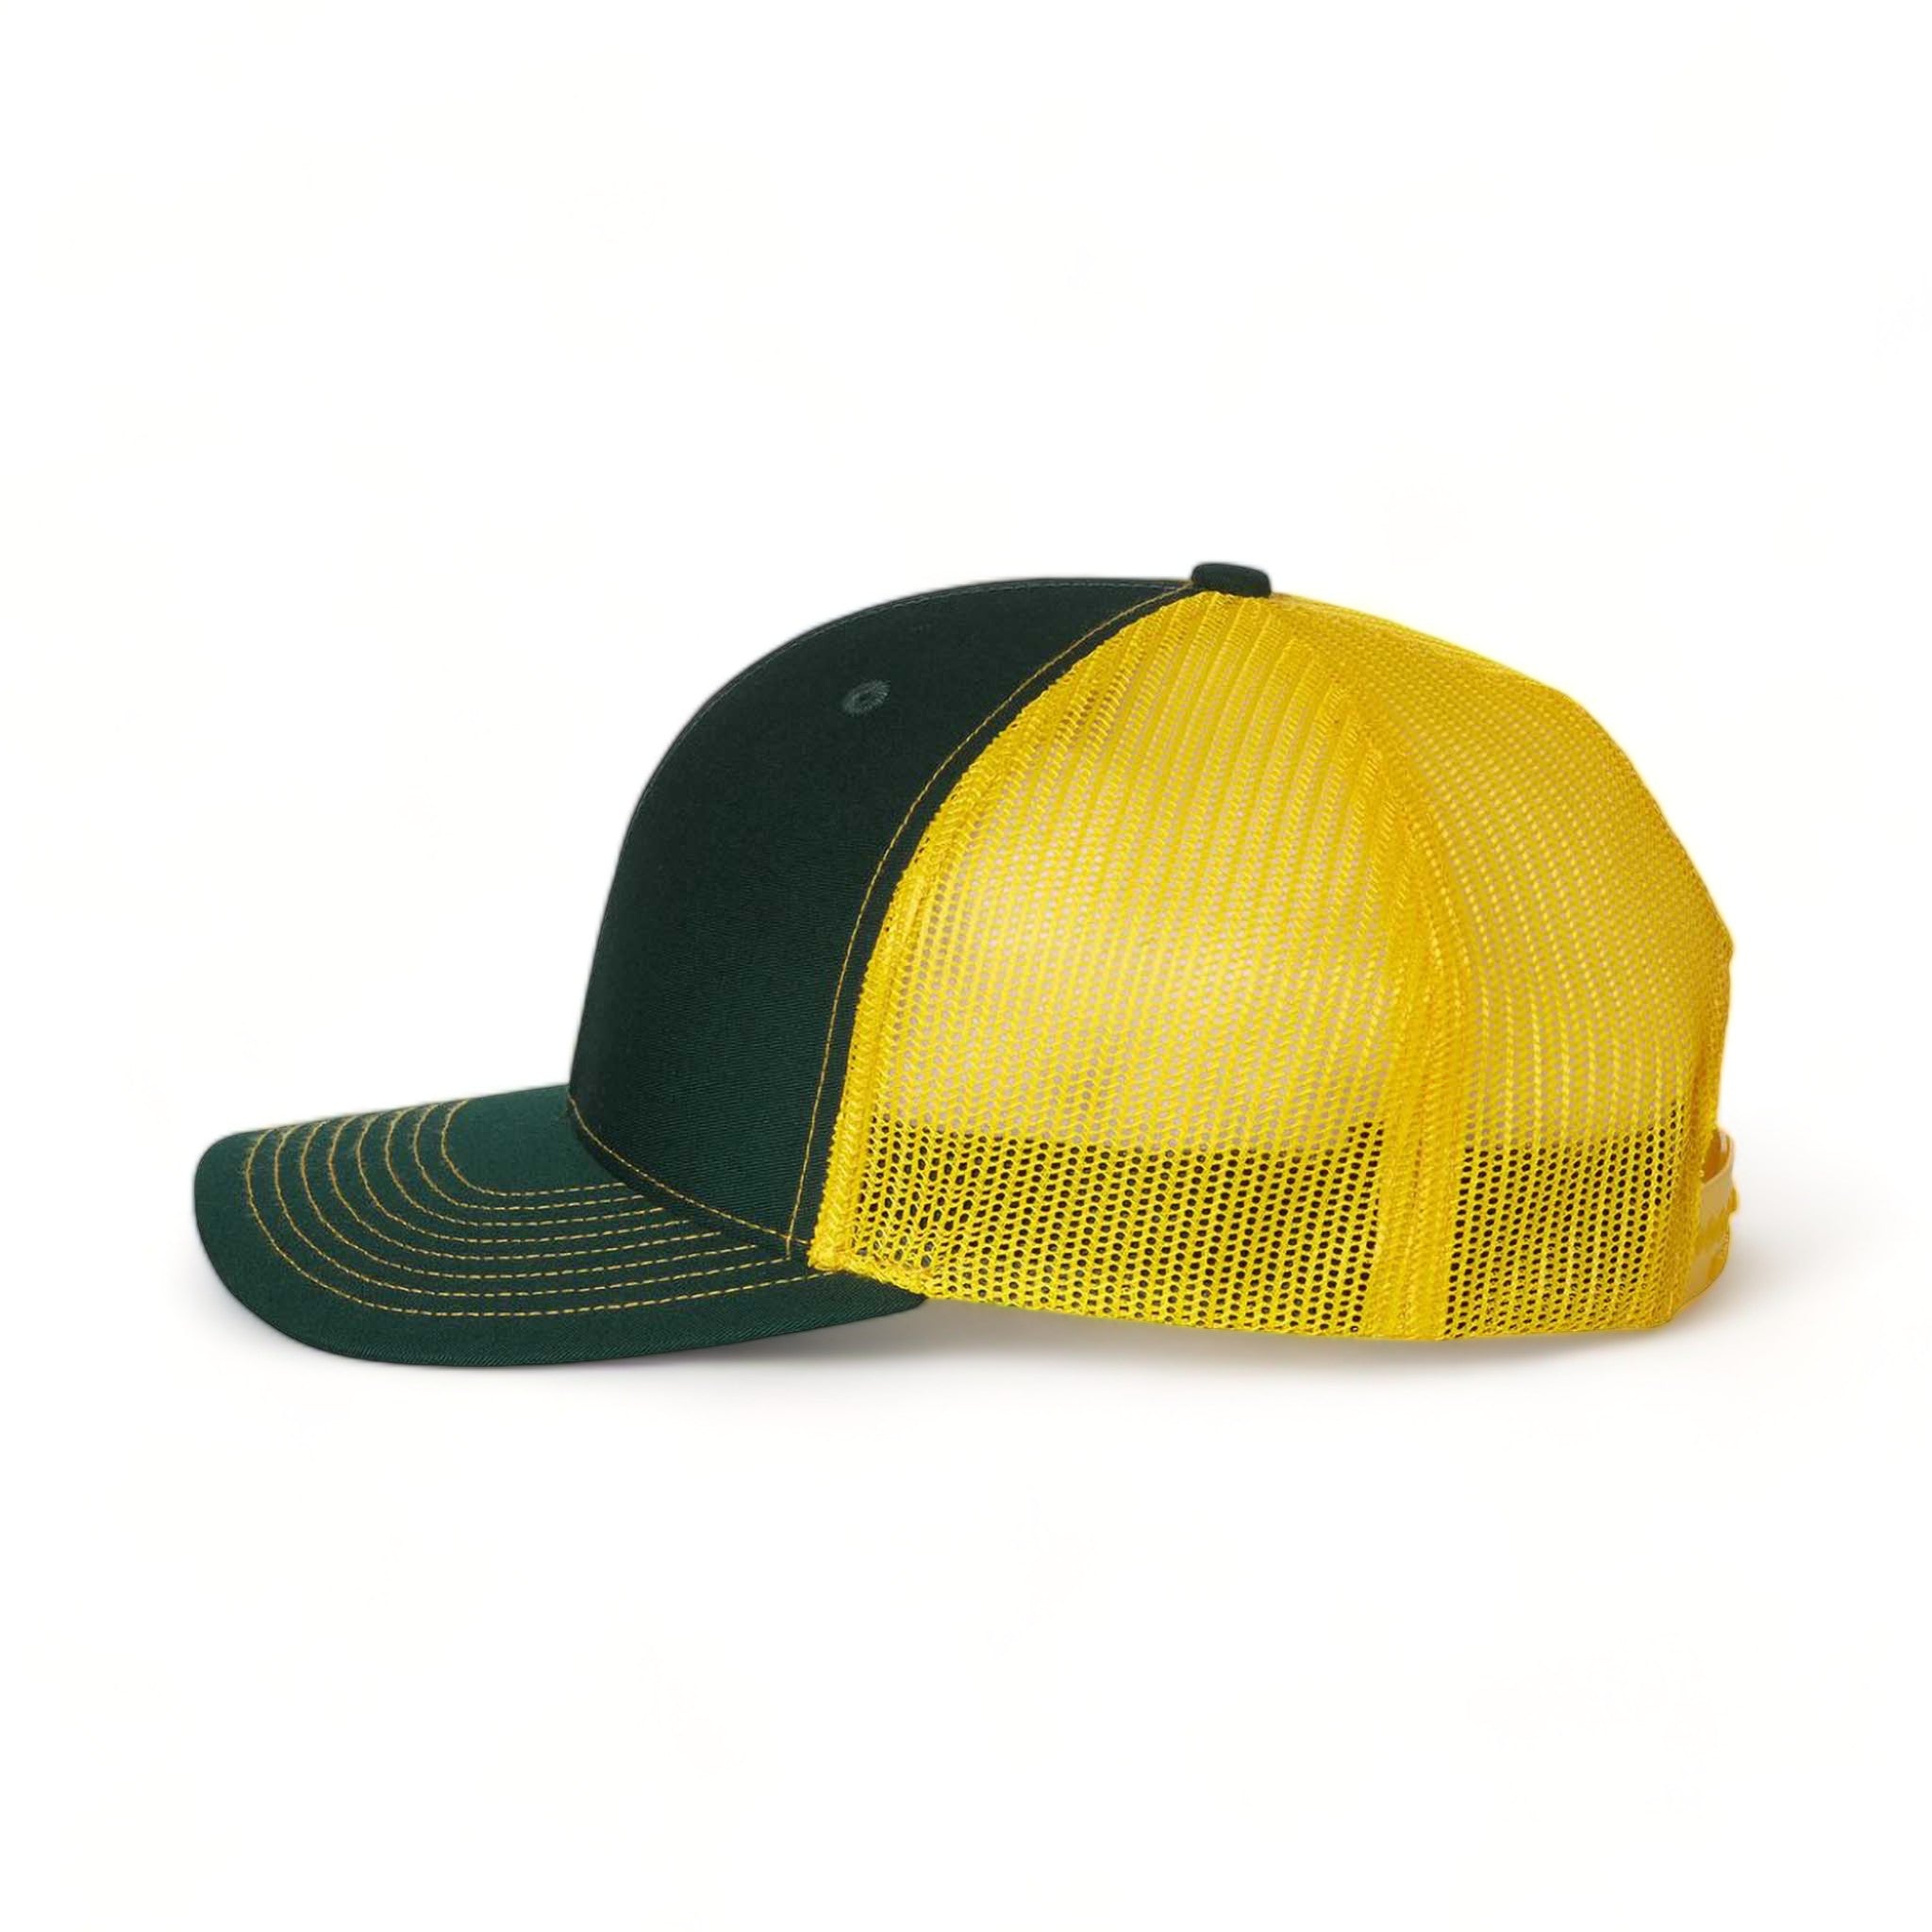 Side view of Richardson 112 custom hat in dark green and yellow